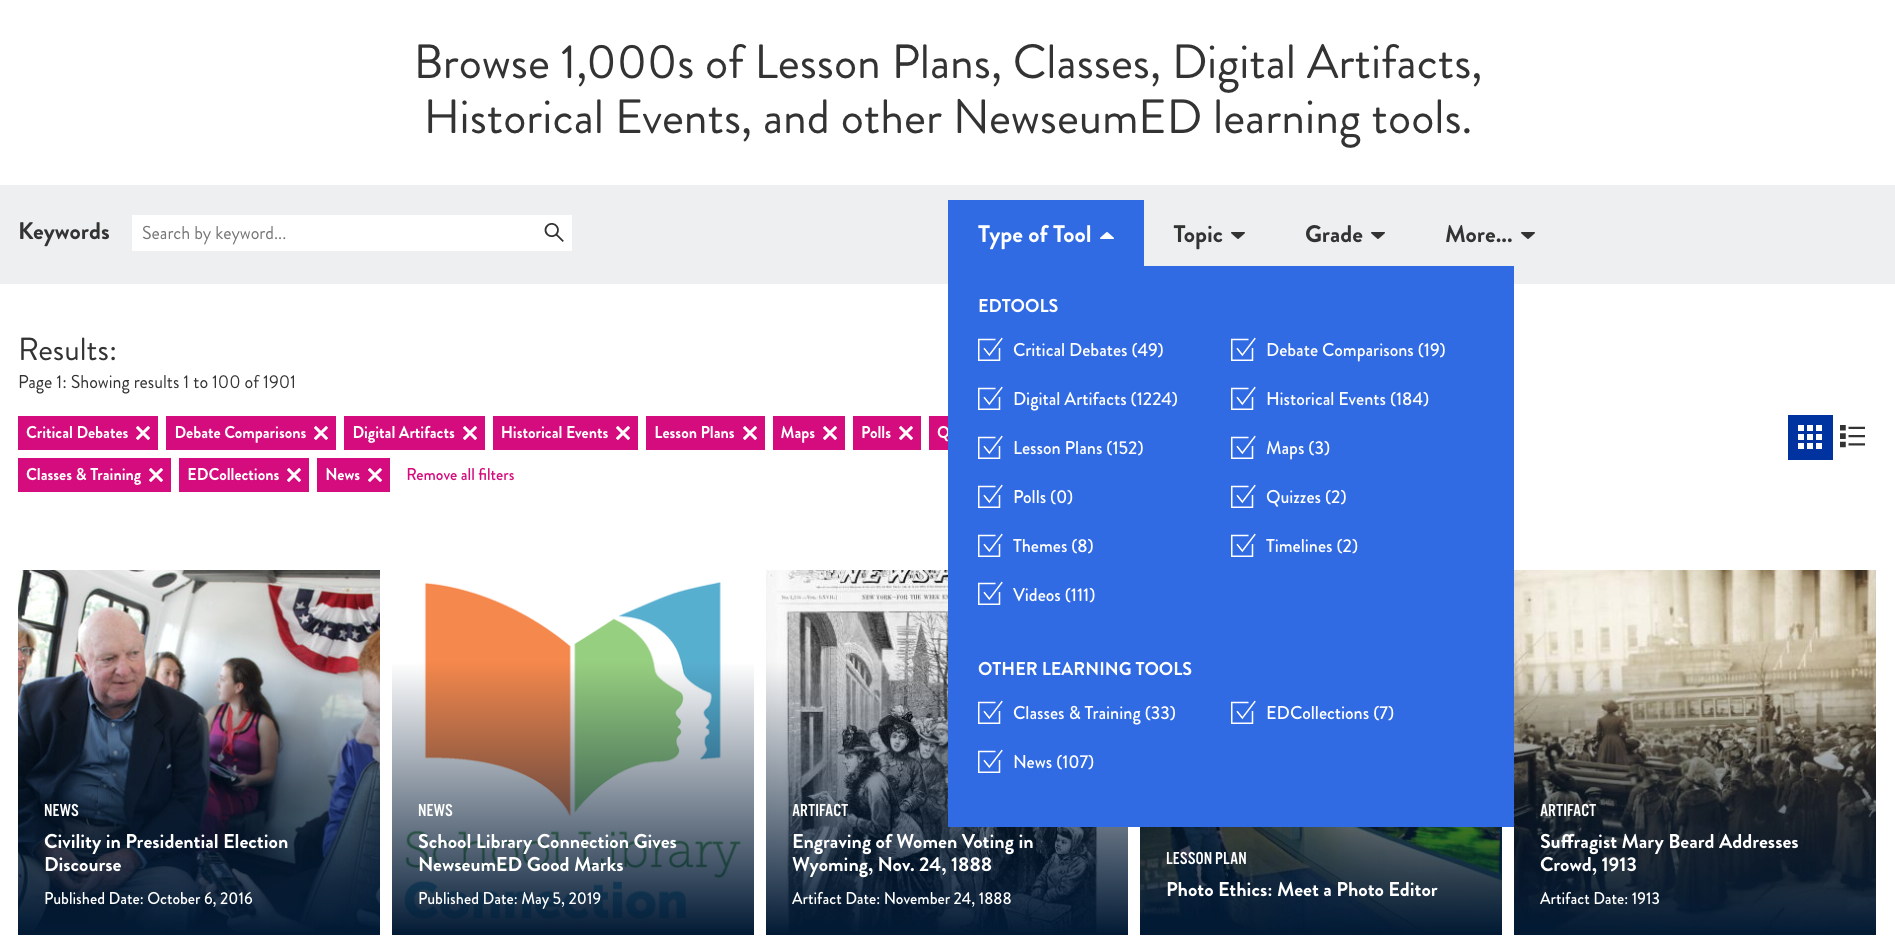 Title: Browse 1,000s of  - Description: Screenshot of the Tools page with tabs for Topic, Grade, and More. . . Type of Tool is selected and different EDTOOLS are selected such as Critical Debates, Digital Artifacts, Lesson Plans, Polls, Themes, Videos, Debate Comparisons, Historical Events, Maps, Quizzed, and Timelines.